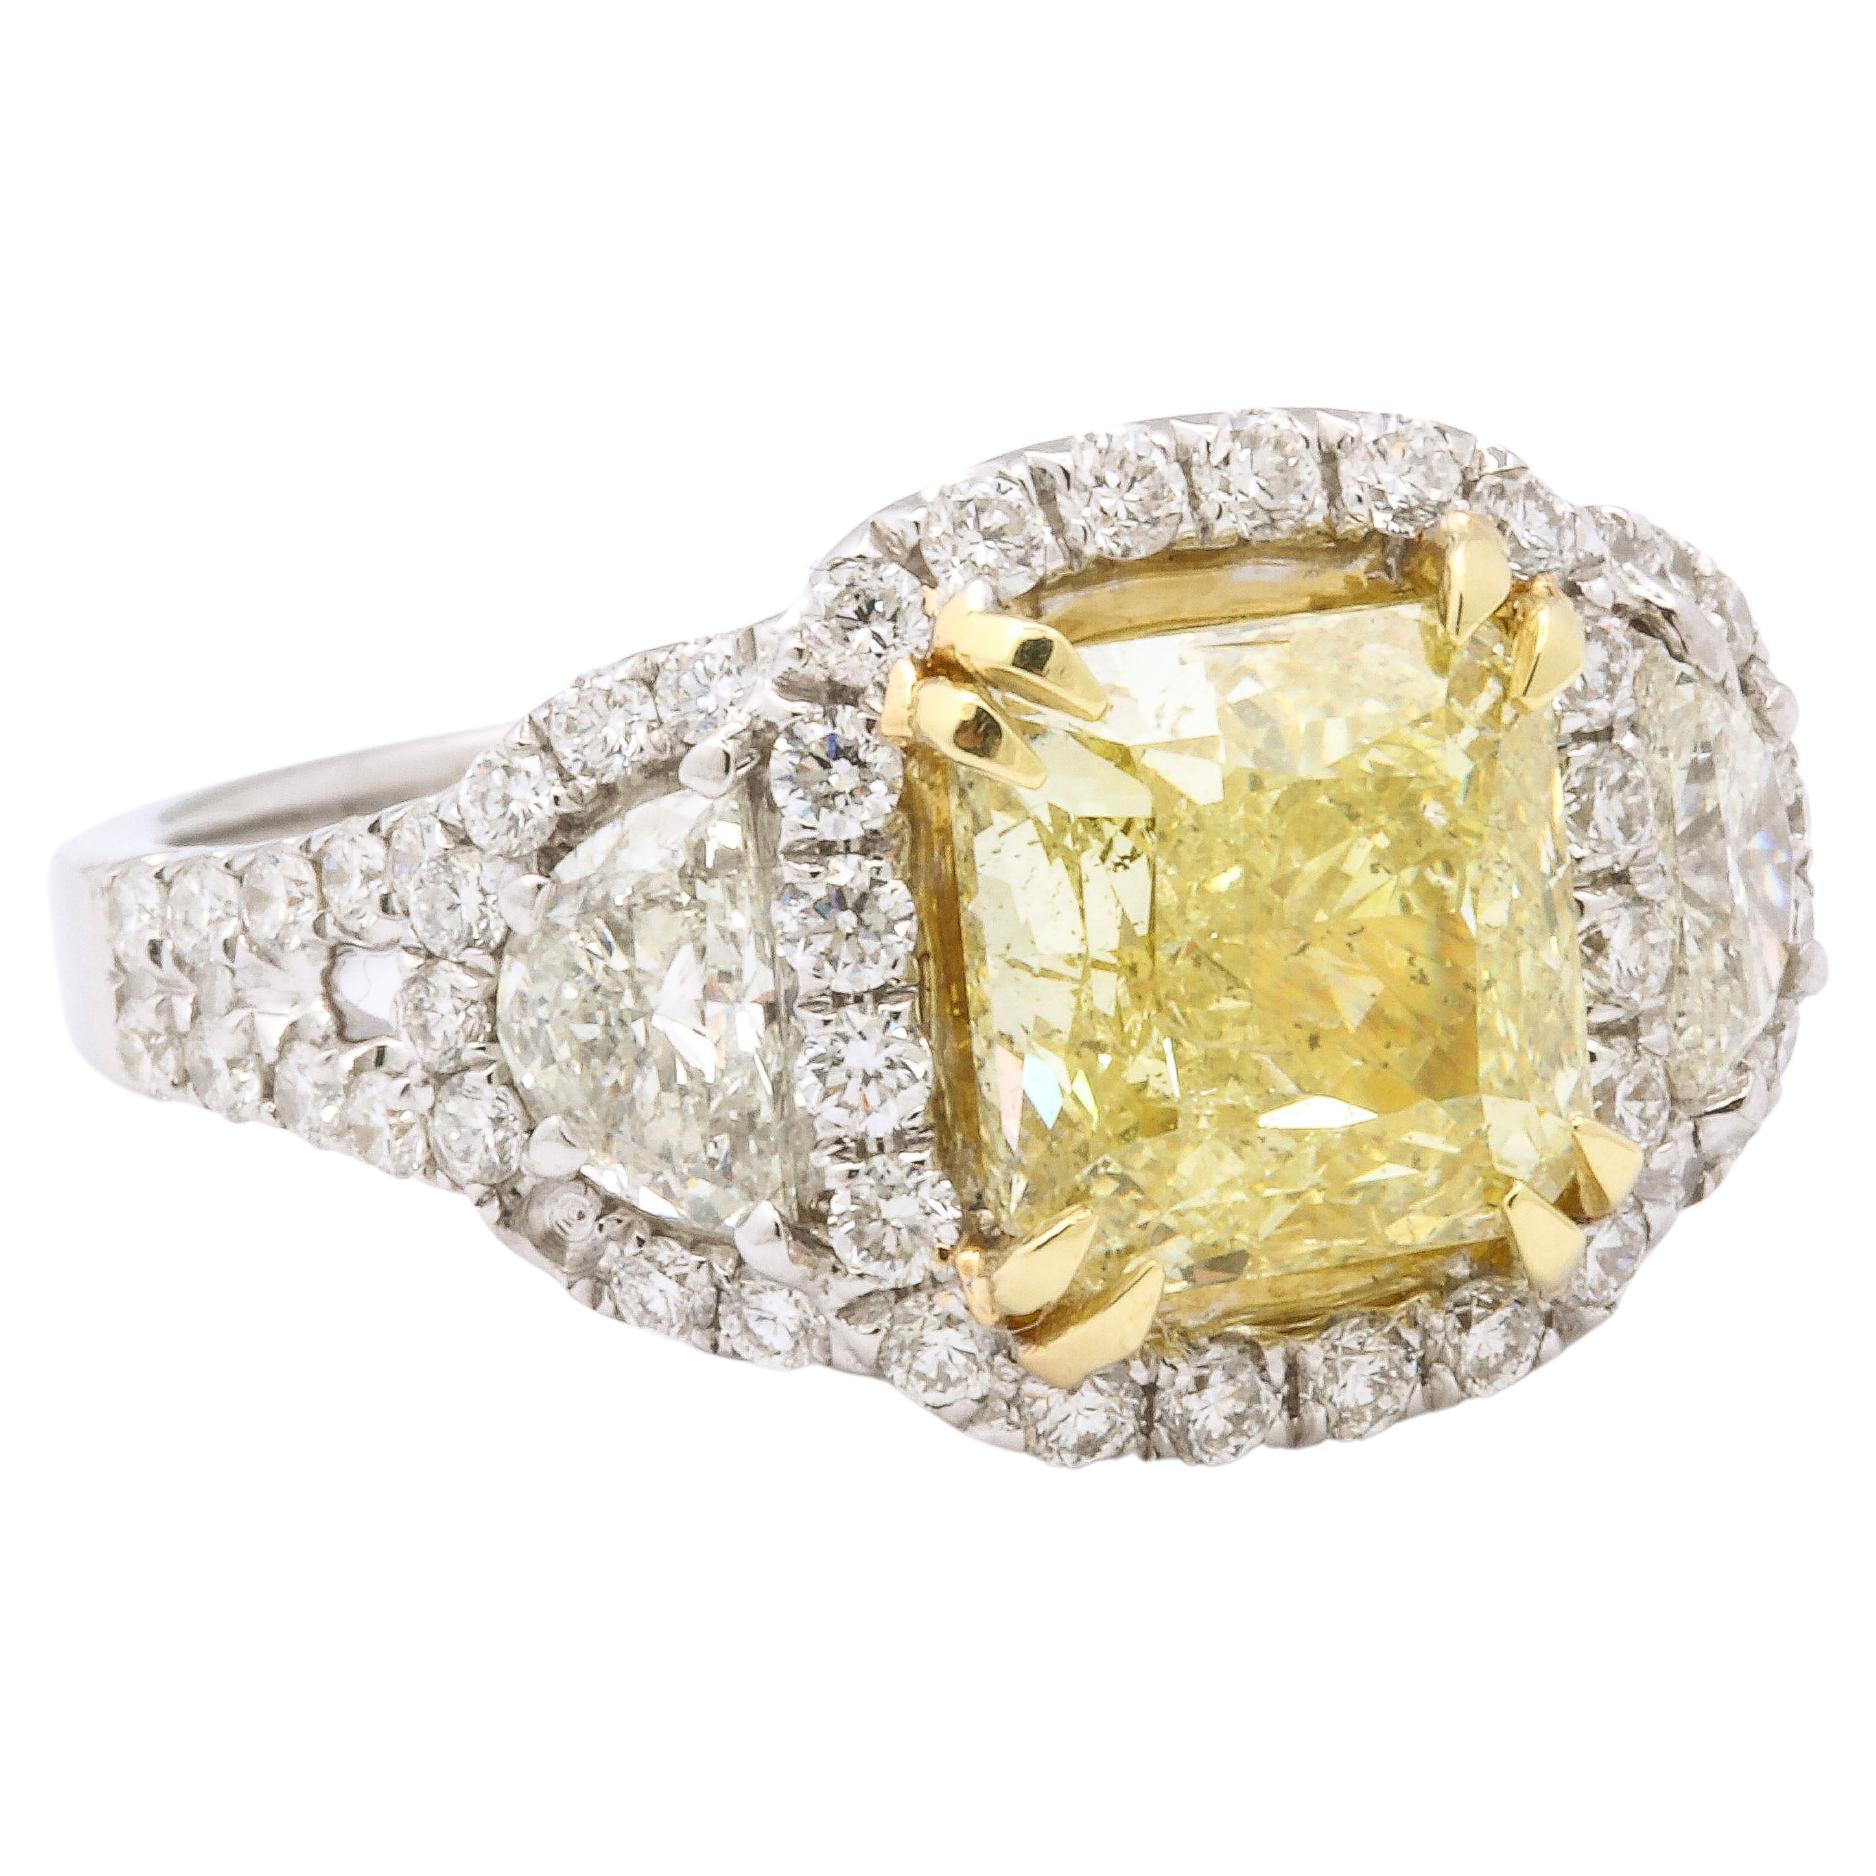 18K Gold Diamond Ring with a center radiant shaped cut yellow diamond. Weighs 3.05 carats, clarity SI-2, color light yellow. Surrounded by two half moon cut diamonds, weighing 0.70 carats, clarity VS-2, color I. Set with round brilliant cut